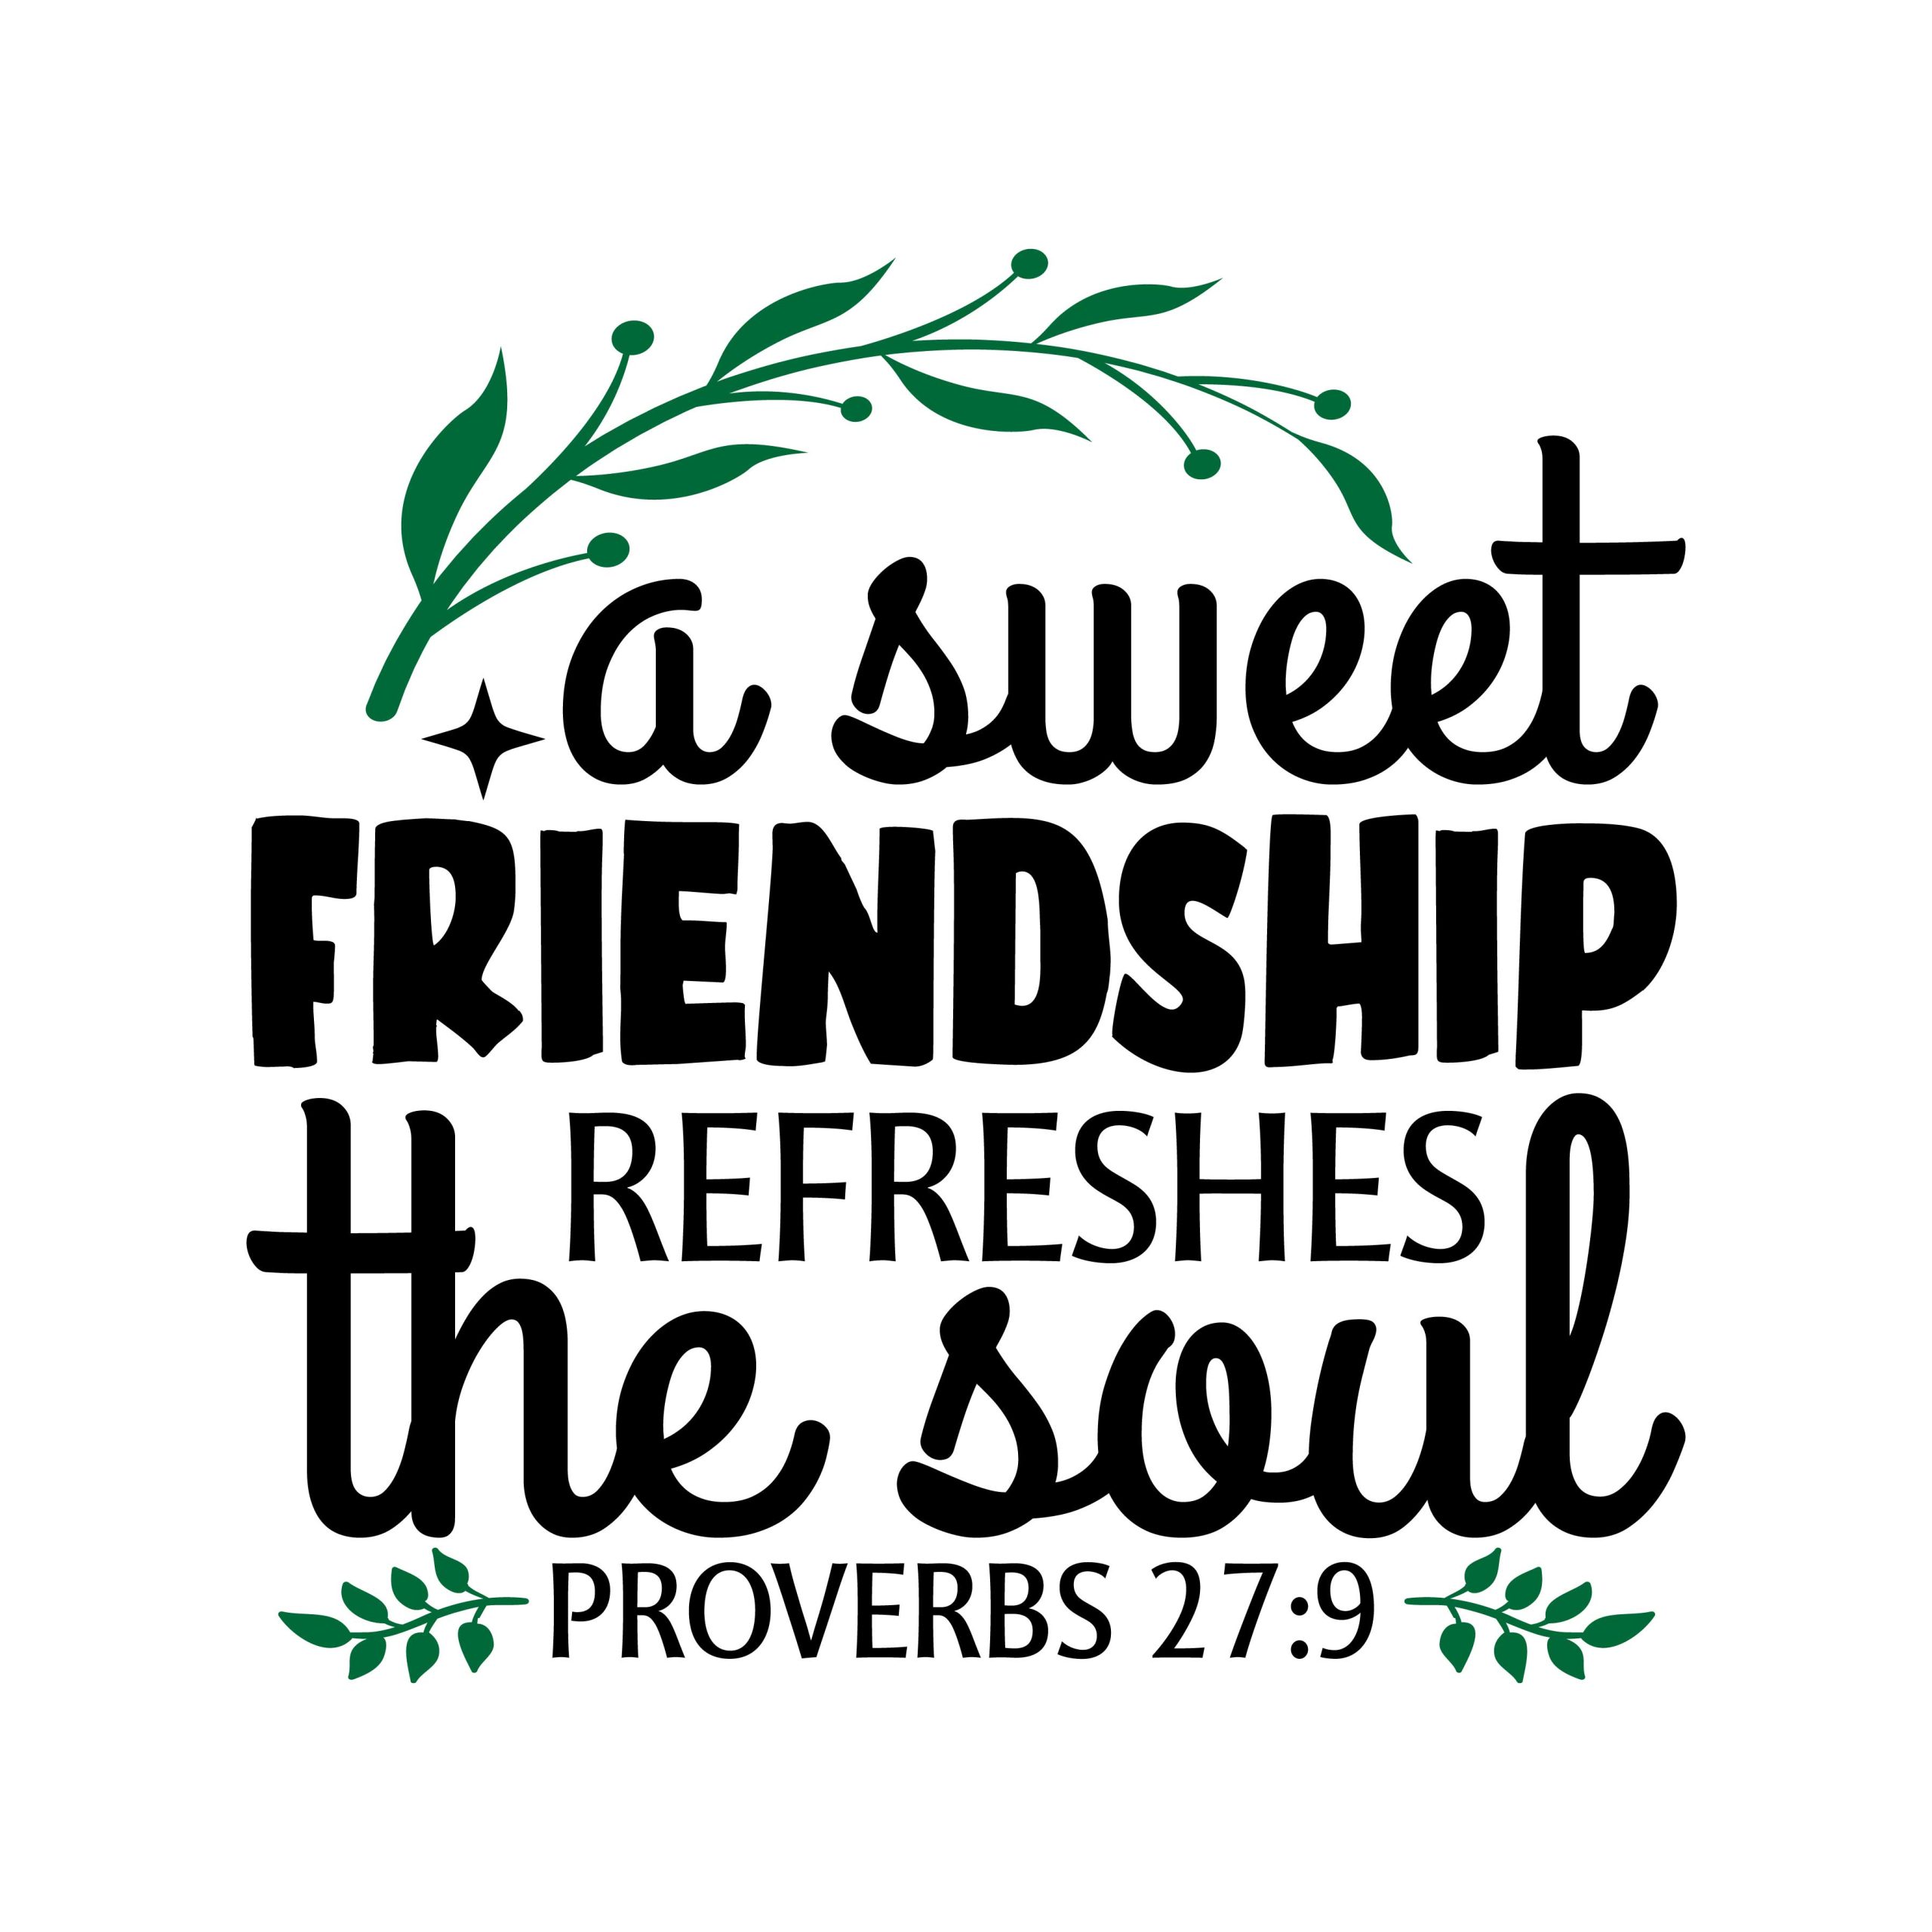 A sweet friendship refreshes the soul Proverbs 27:9, bible verses, scripture verses, svg files, passages, sayings, cricut designs, silhouette, embroidery, bundle, free cut files, design space, vector